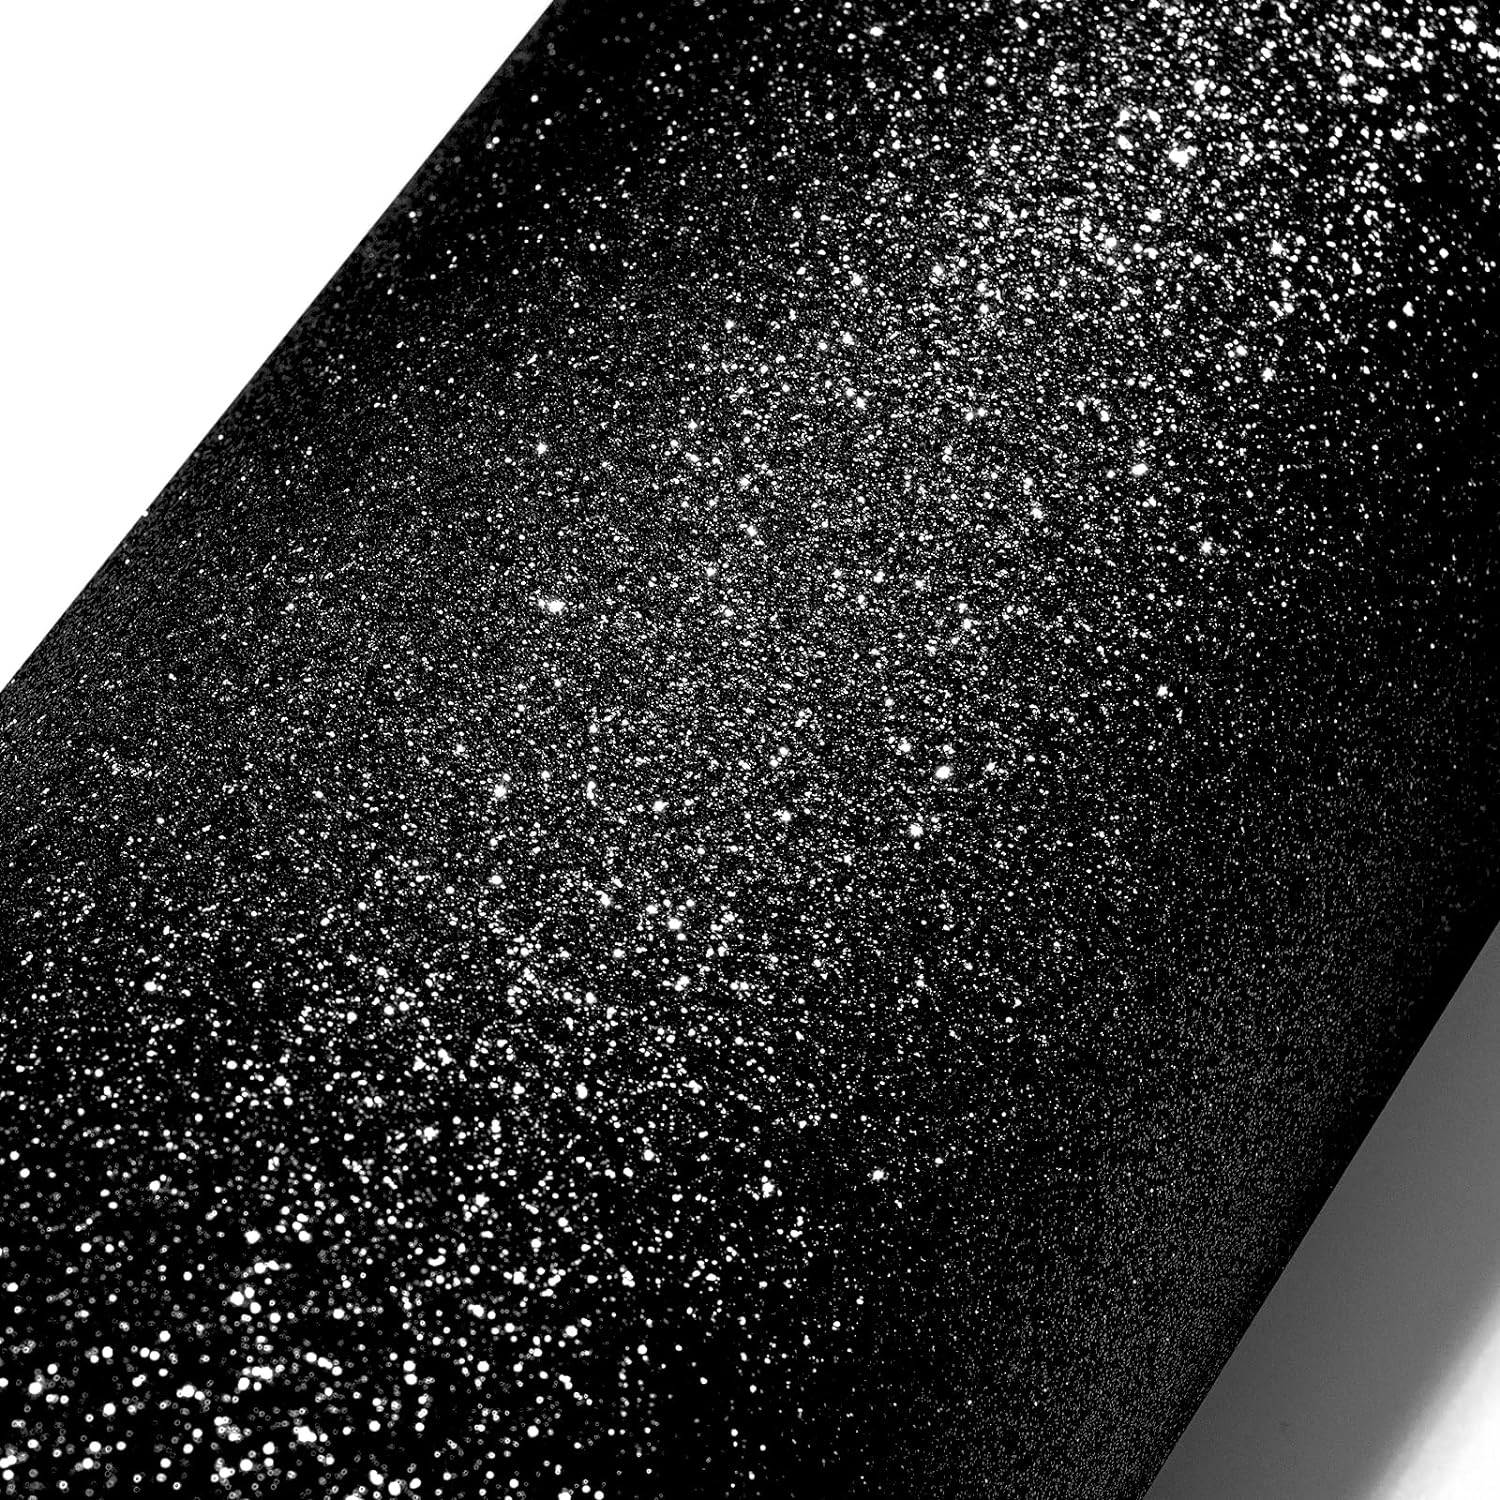 Stickyart Black Glitter Wallpaper Peel and Stick Sparkle Wallpaper Roll Self Adhesive Glitter Contact Paper for Cabinets Removable Glitter Fabric Wallpaper Decorative Bedroom Accent Walls 15.8x78.7